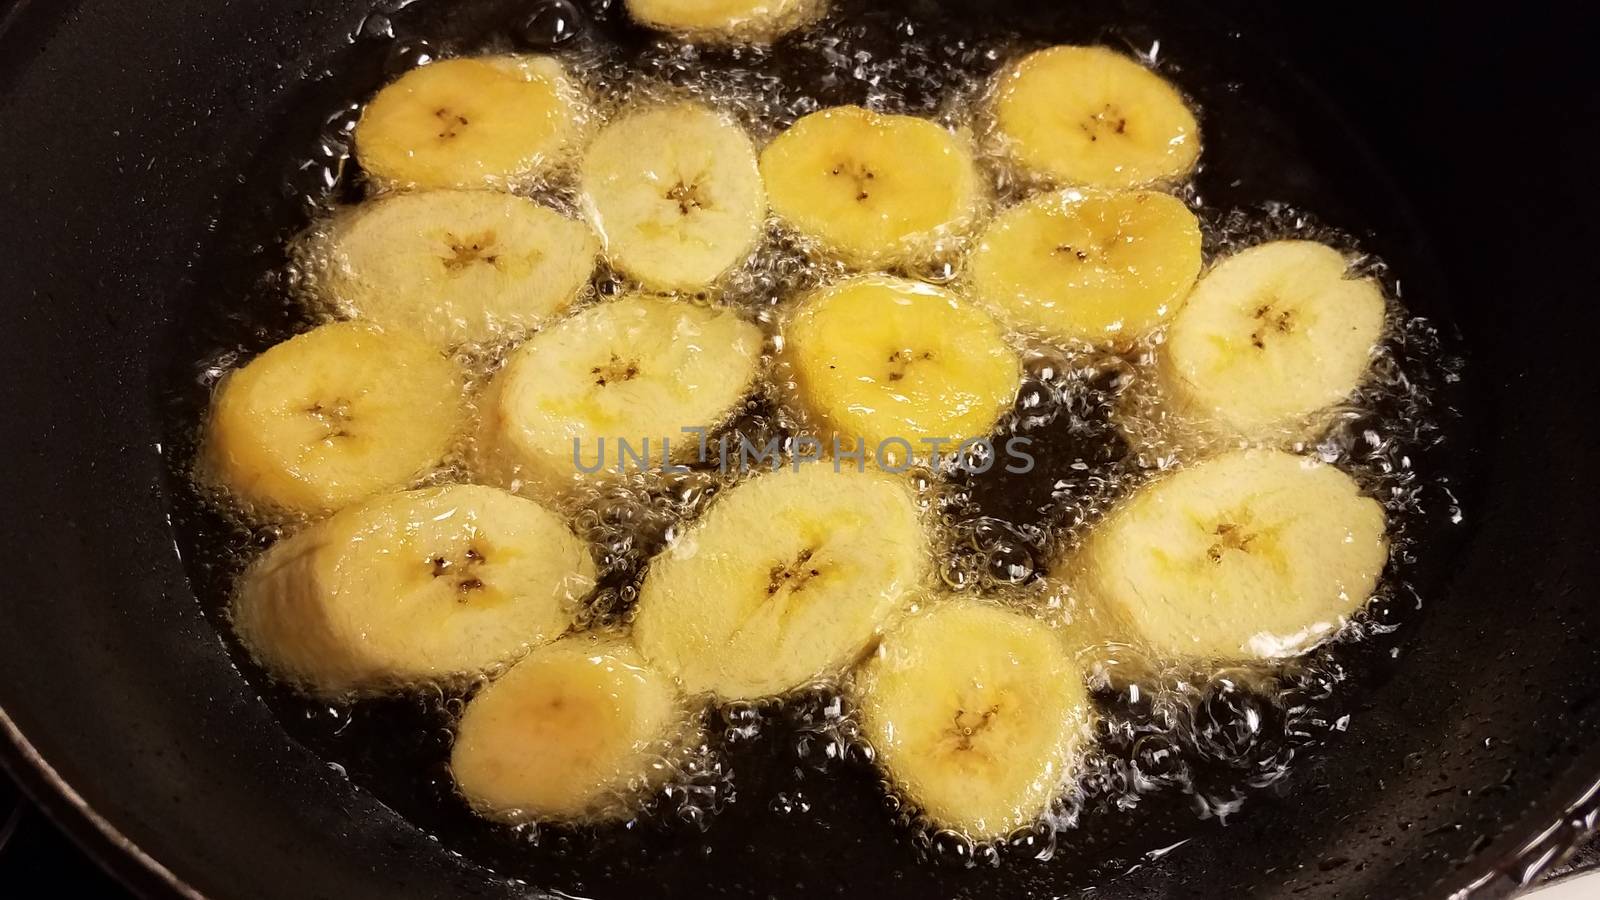 plantain banana from Puerto Rico boiling in oil by stockphotofan1